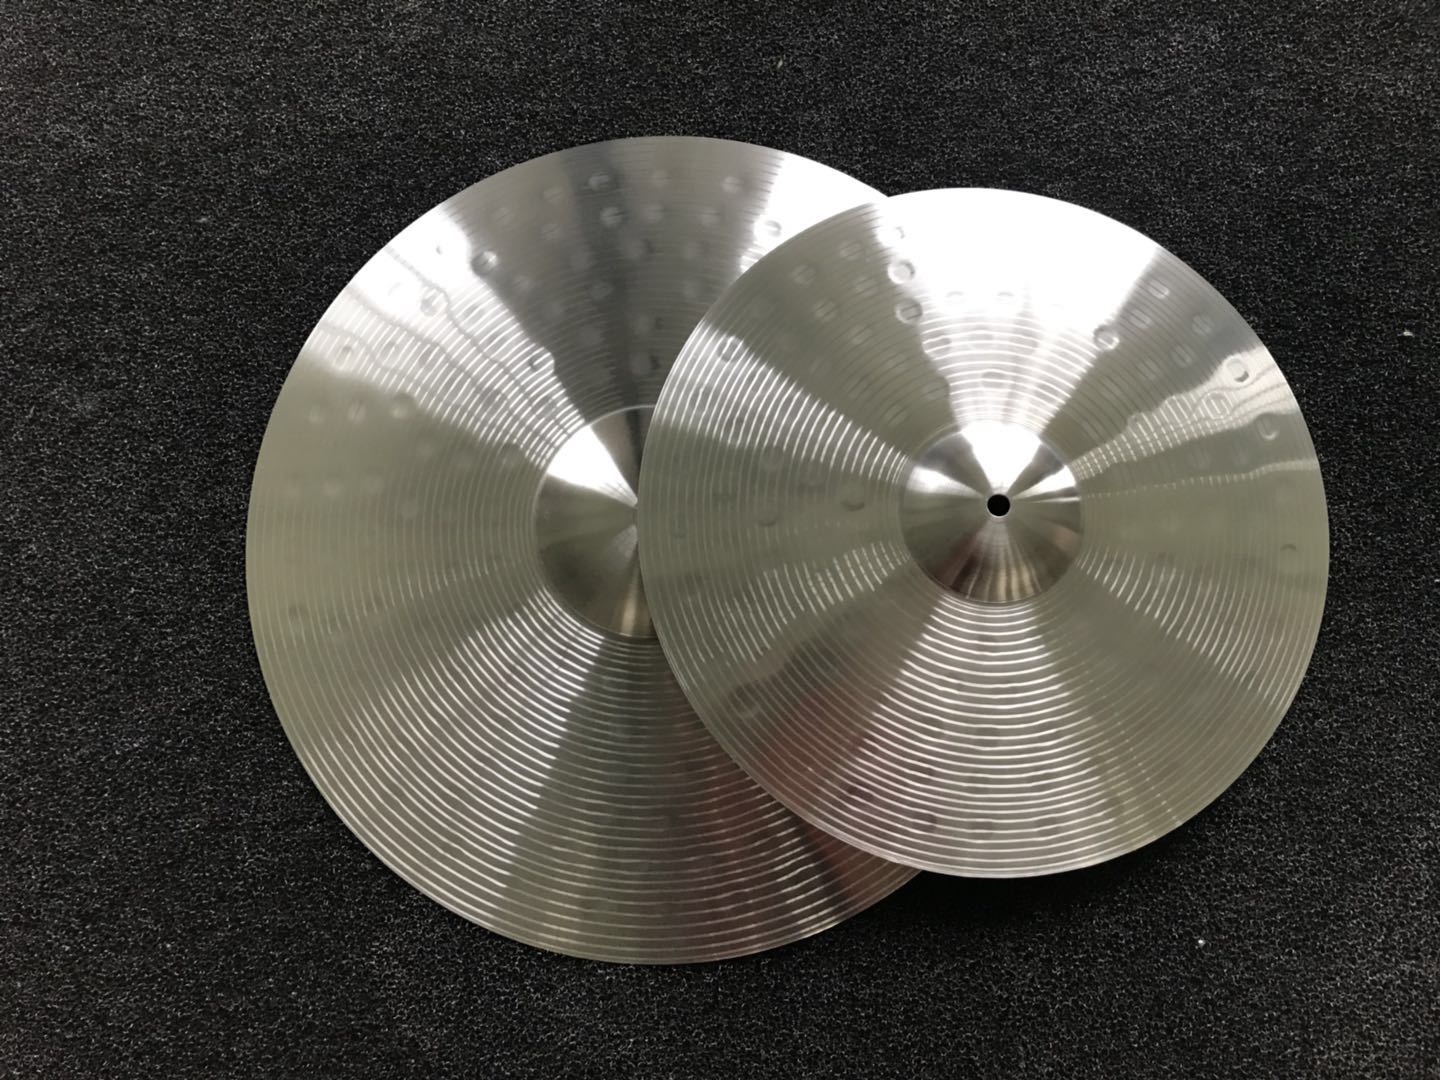 Stainless Steel Cymbals With Good Quality